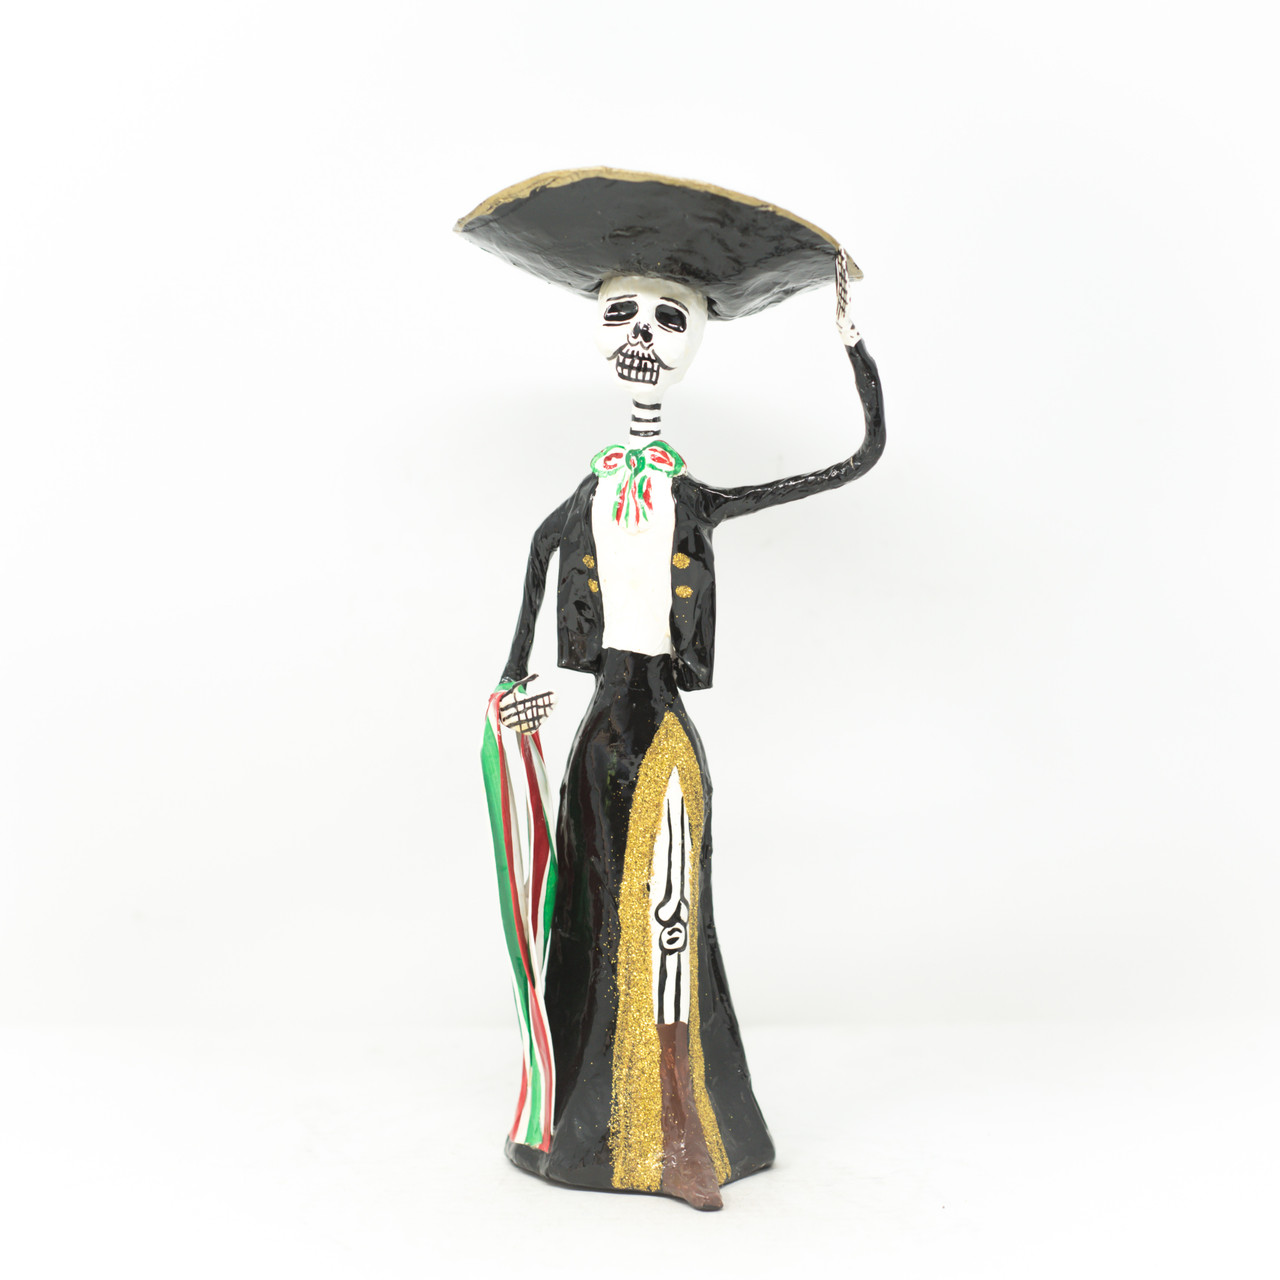 Charra Mexican Skeleton, Elegant Mariachi Singer, Day of The Dead Decorations, Music Performer, Hand Painted Folk Art Doll